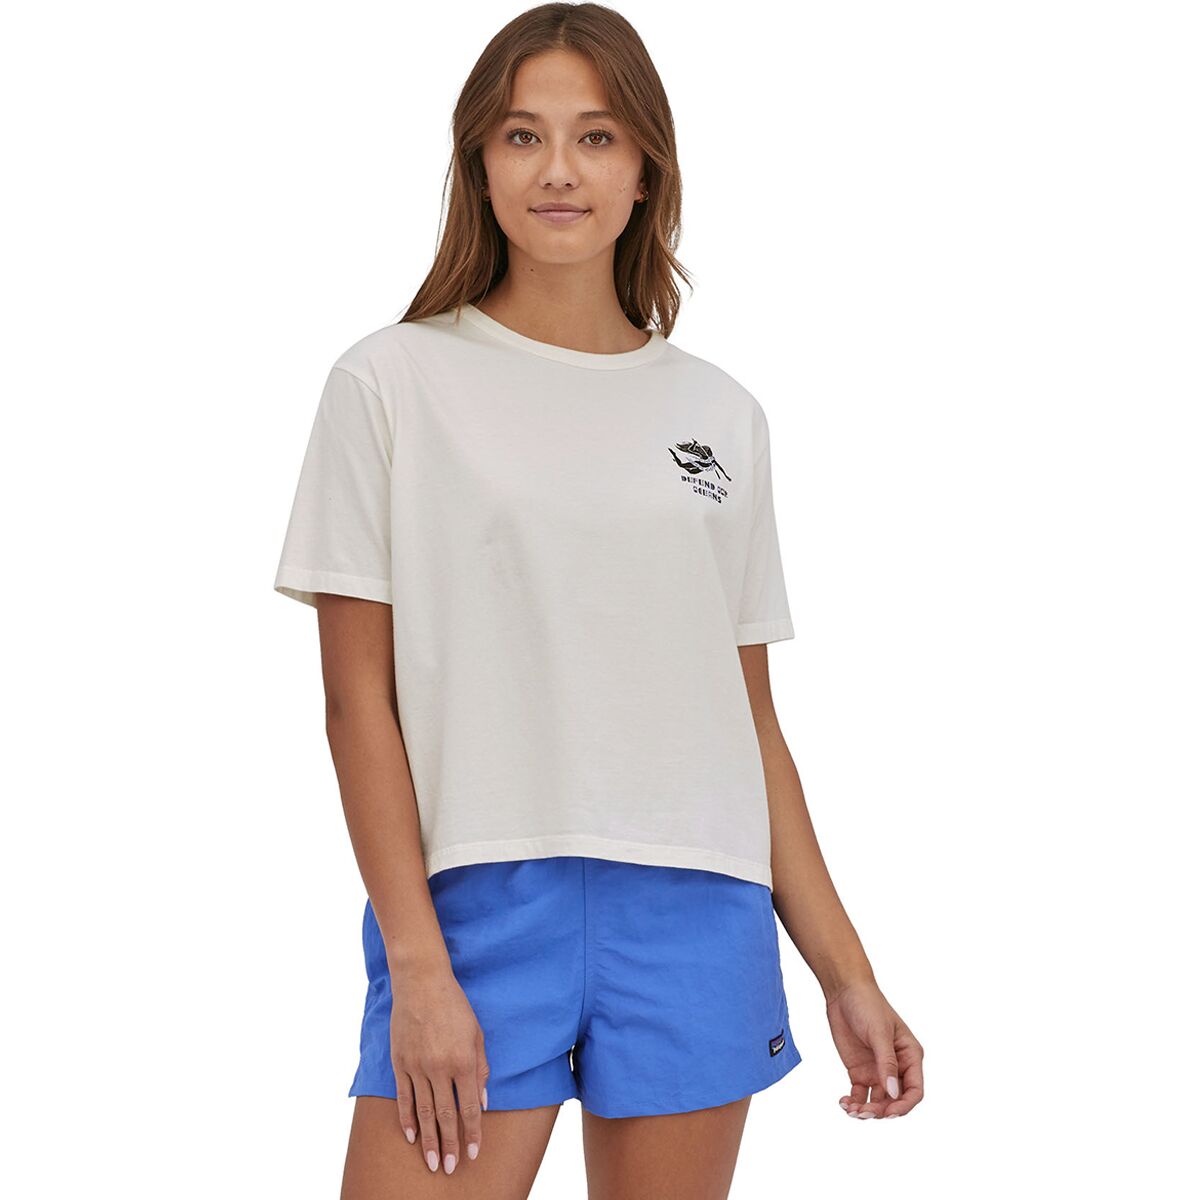 Patagonia Defend Our Oceans Organic Easy Cut T-Shirt - Women's